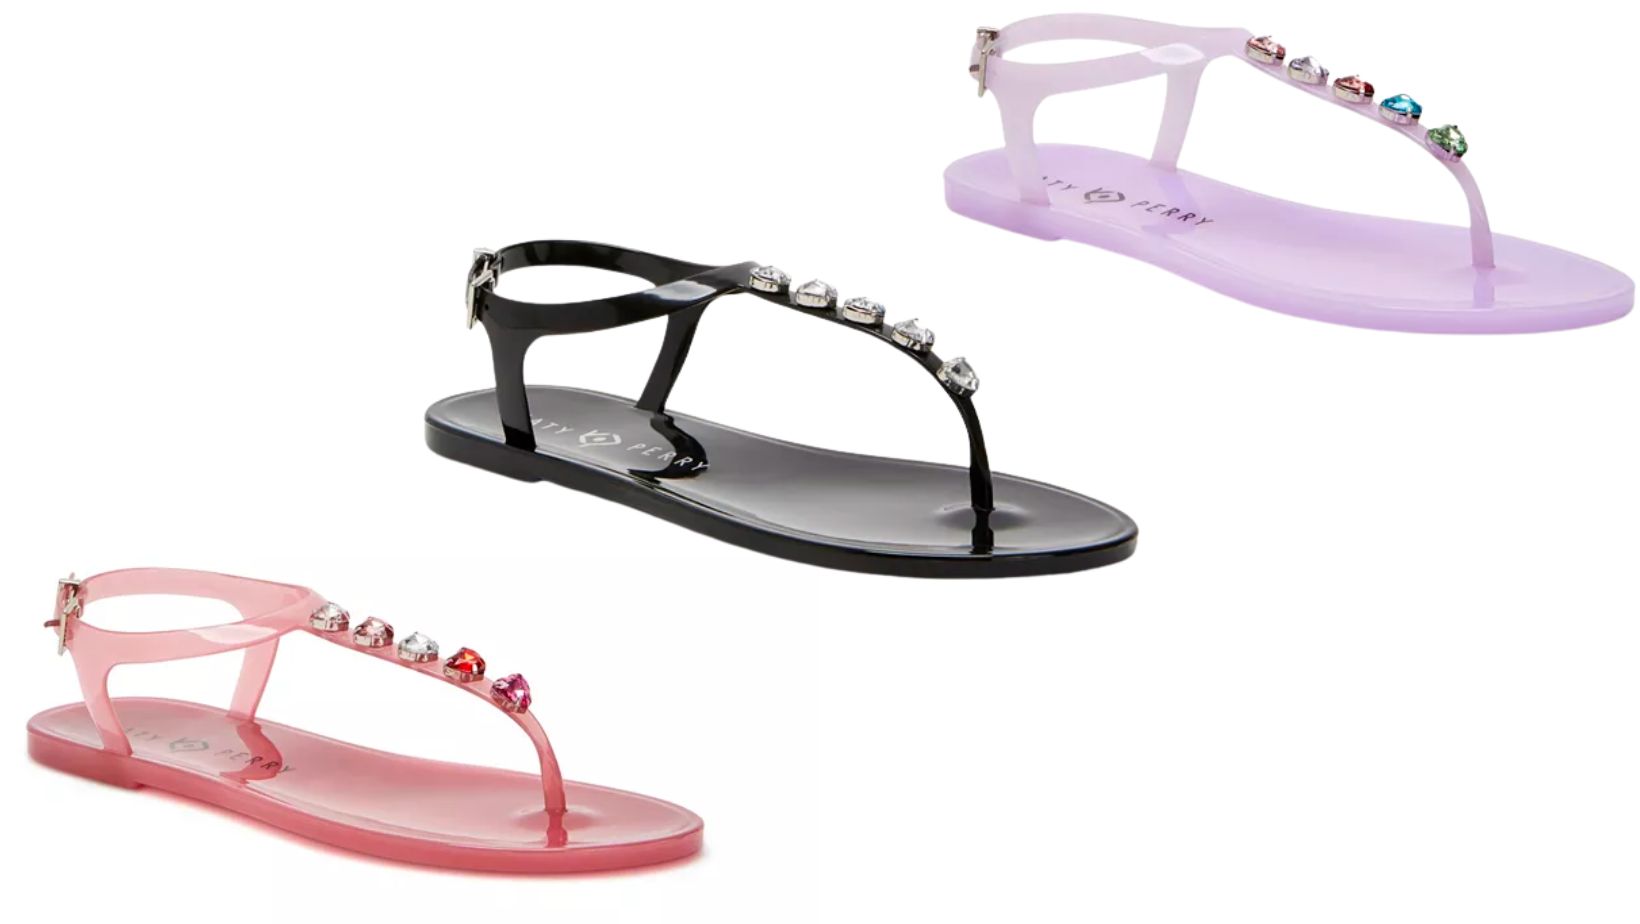 Katy Perry Women’s Sandals at Macy's